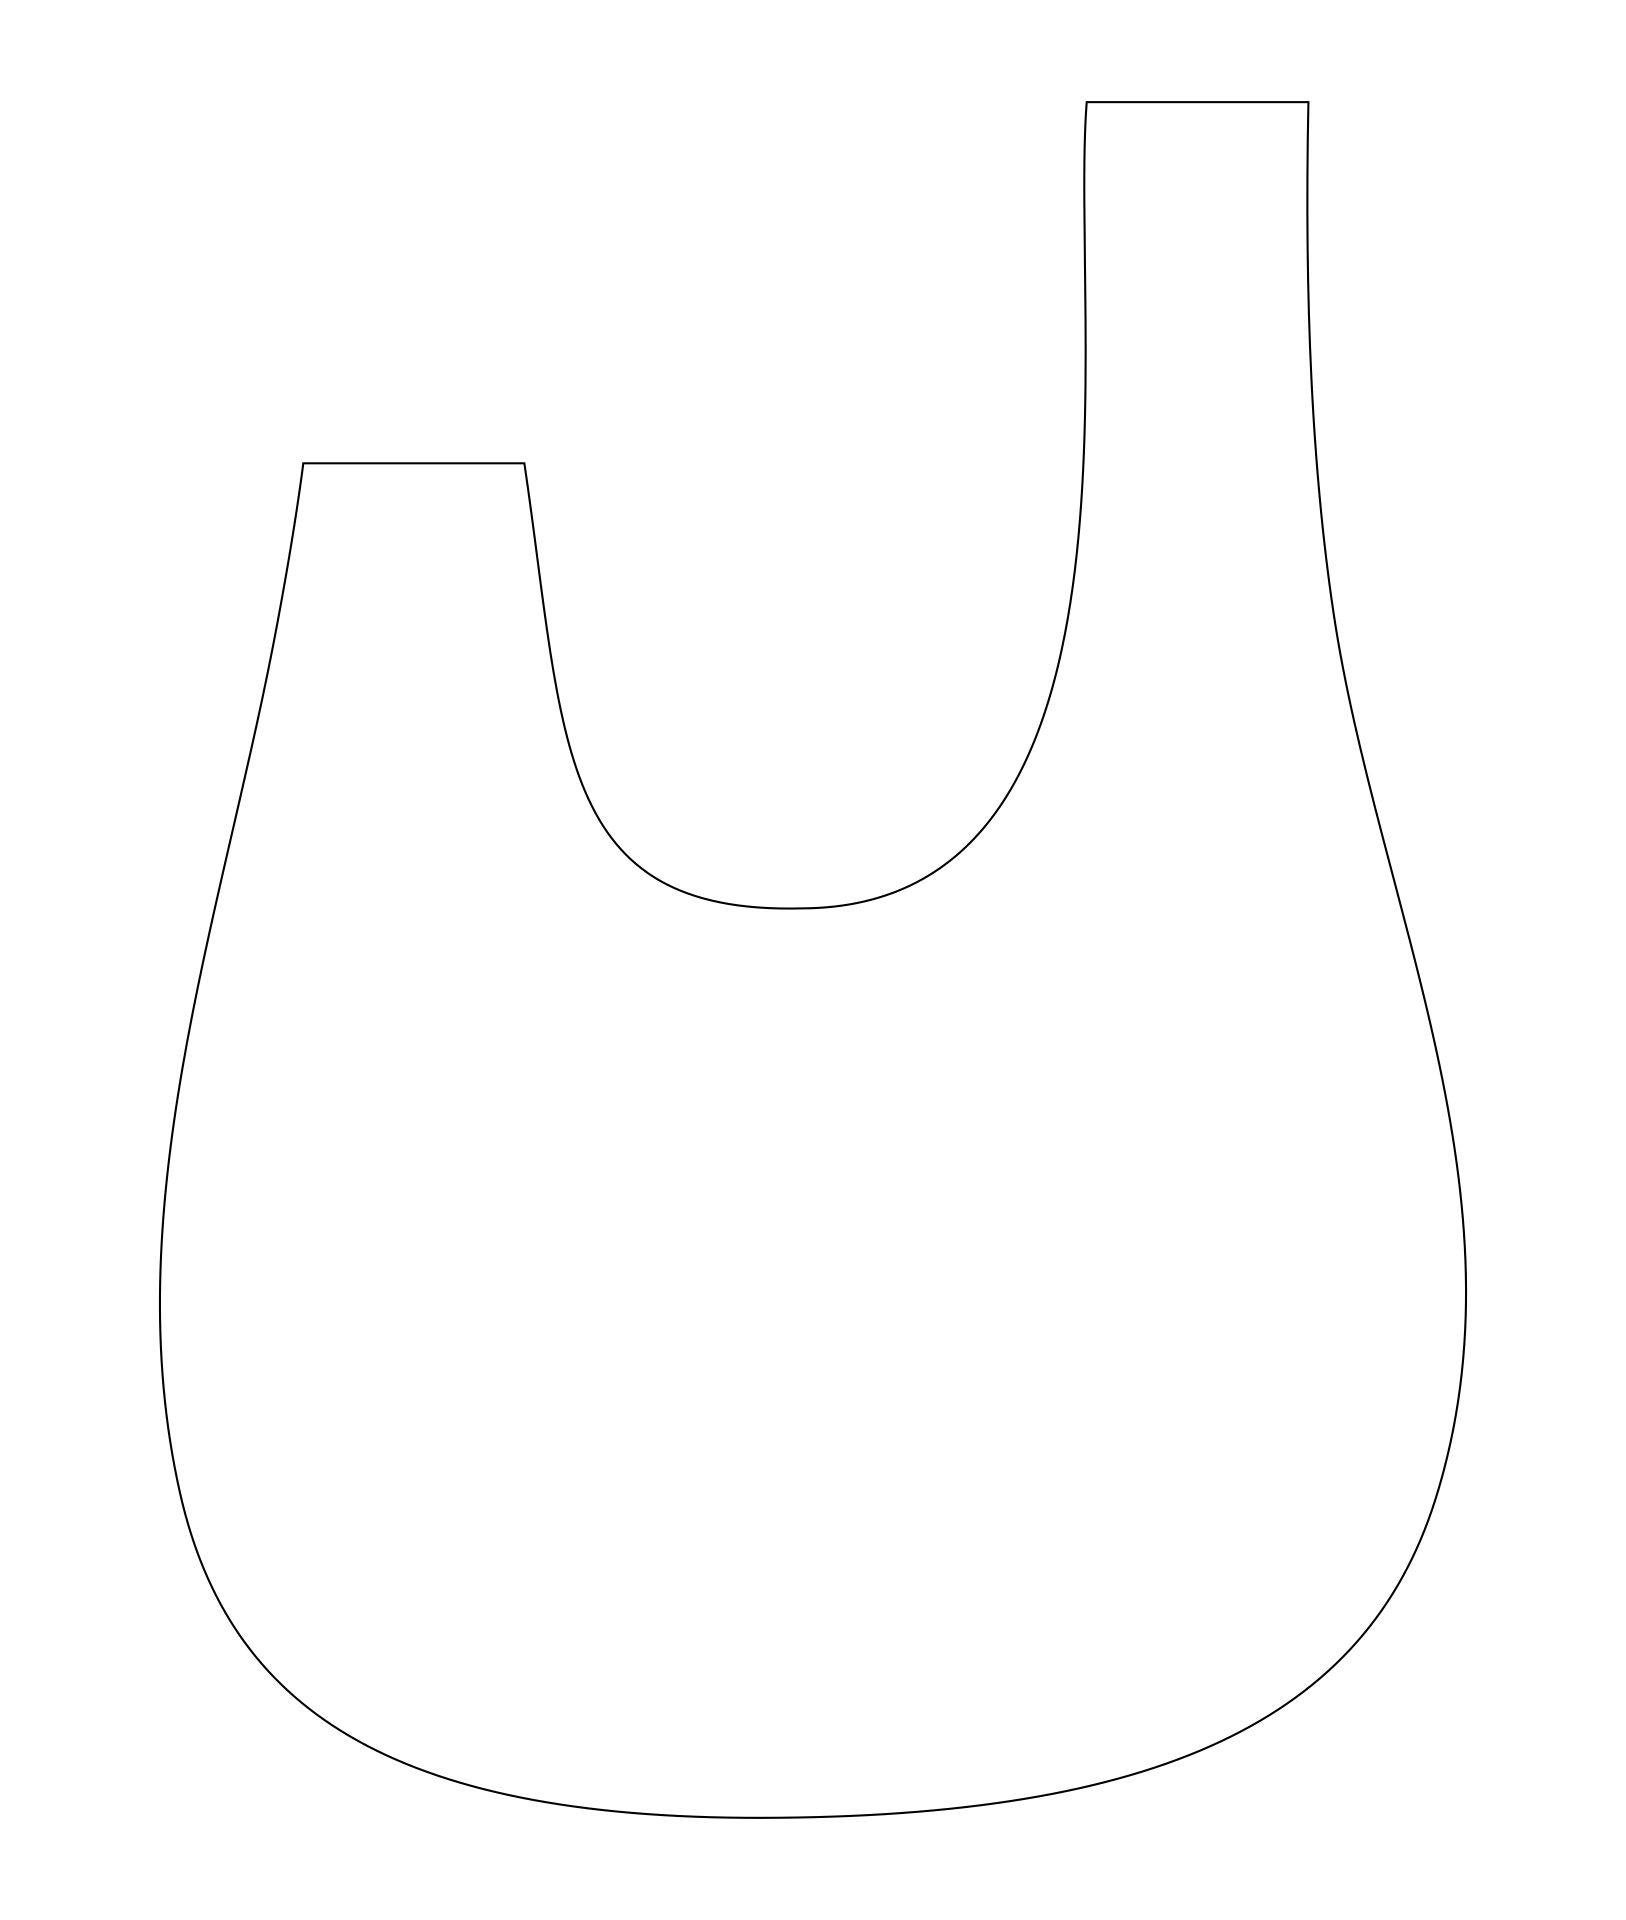 Template Pattern For Japanese Knot Bag